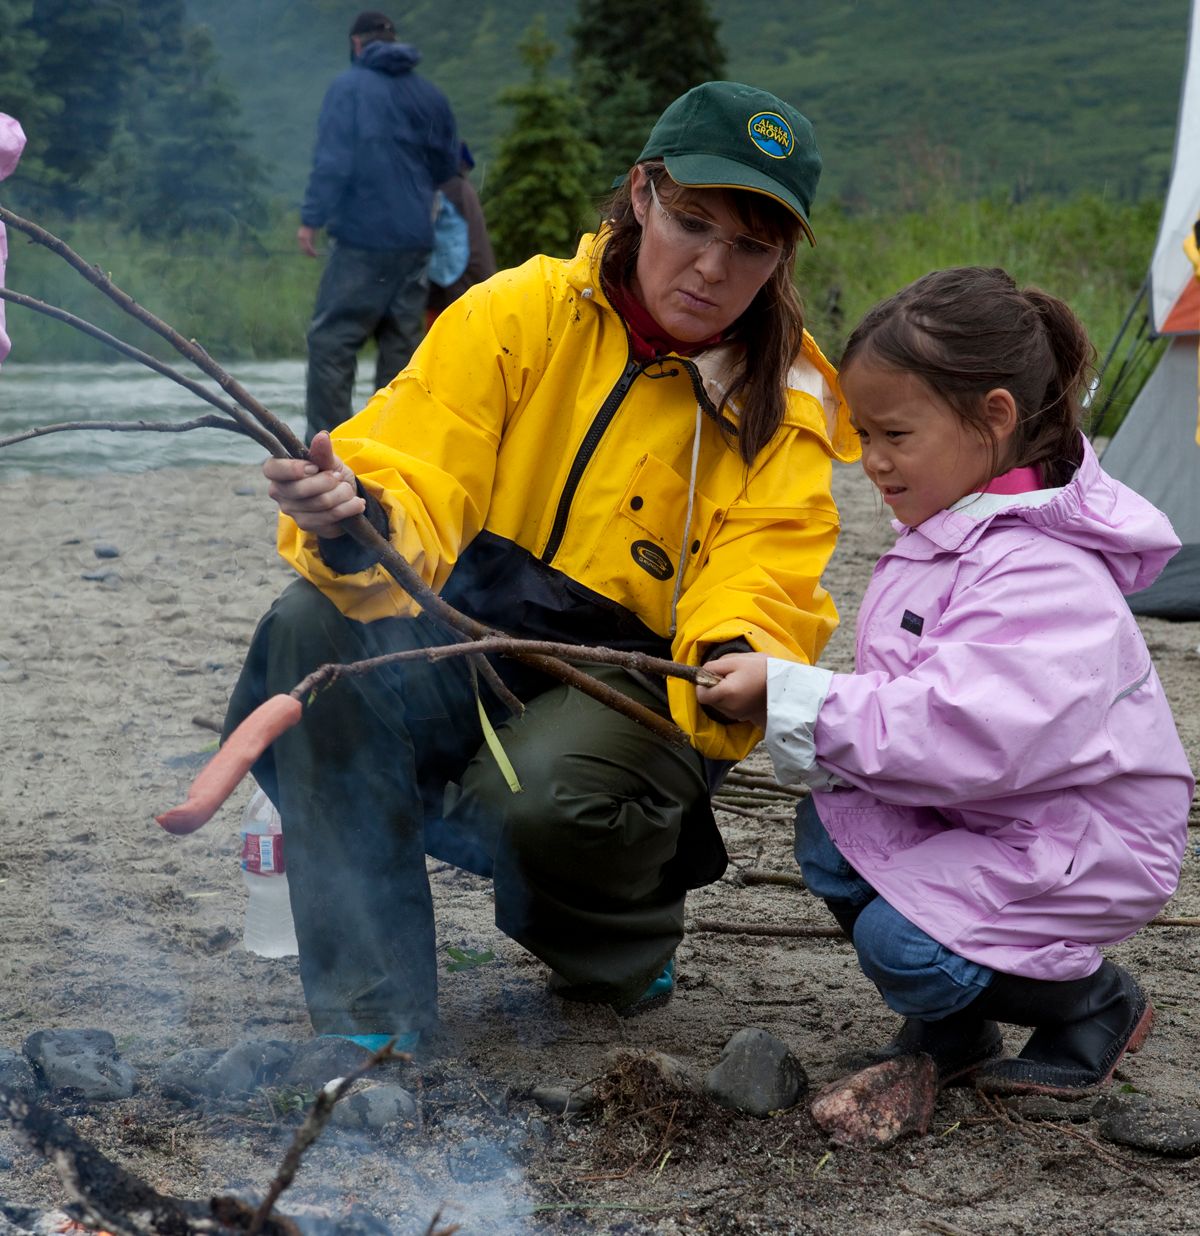 COFFEE CREEK, ALASKA, JUY 25 2010: Under a steady, pouring rain, Sarah Palin helps Gosselin kids make a smore at the remote camping spot where the Gosselins were supposed to camp with the Palins, but cancelled and left for a lodge because of the rain (photo Gilles Mingasson/Getty Images)  (Gilles Mingasson/getty Images)